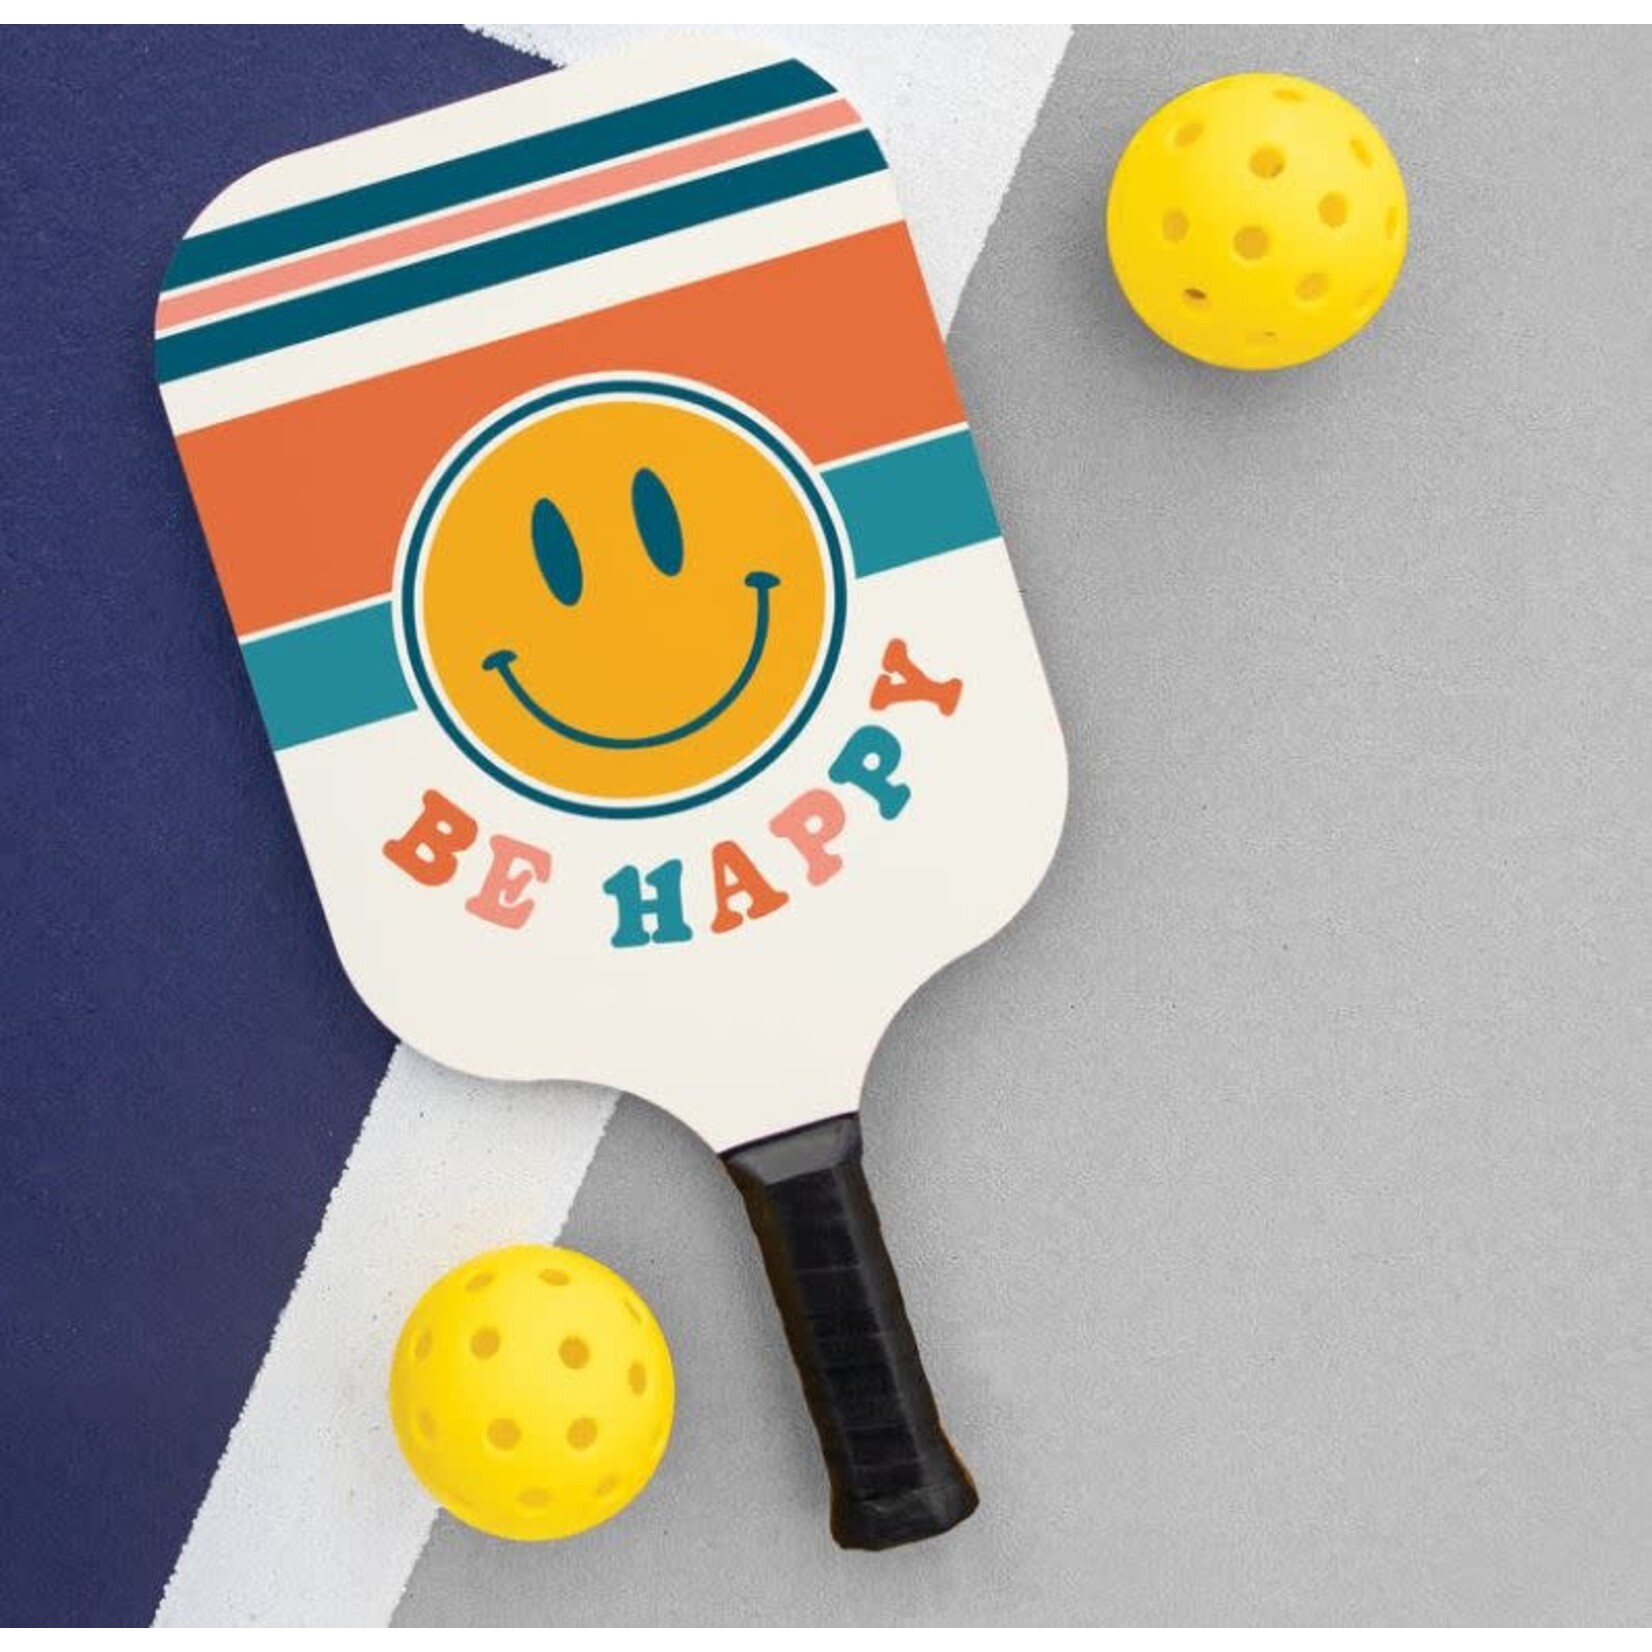 PICKLEBOARD PADDLE "BE HAPPY"